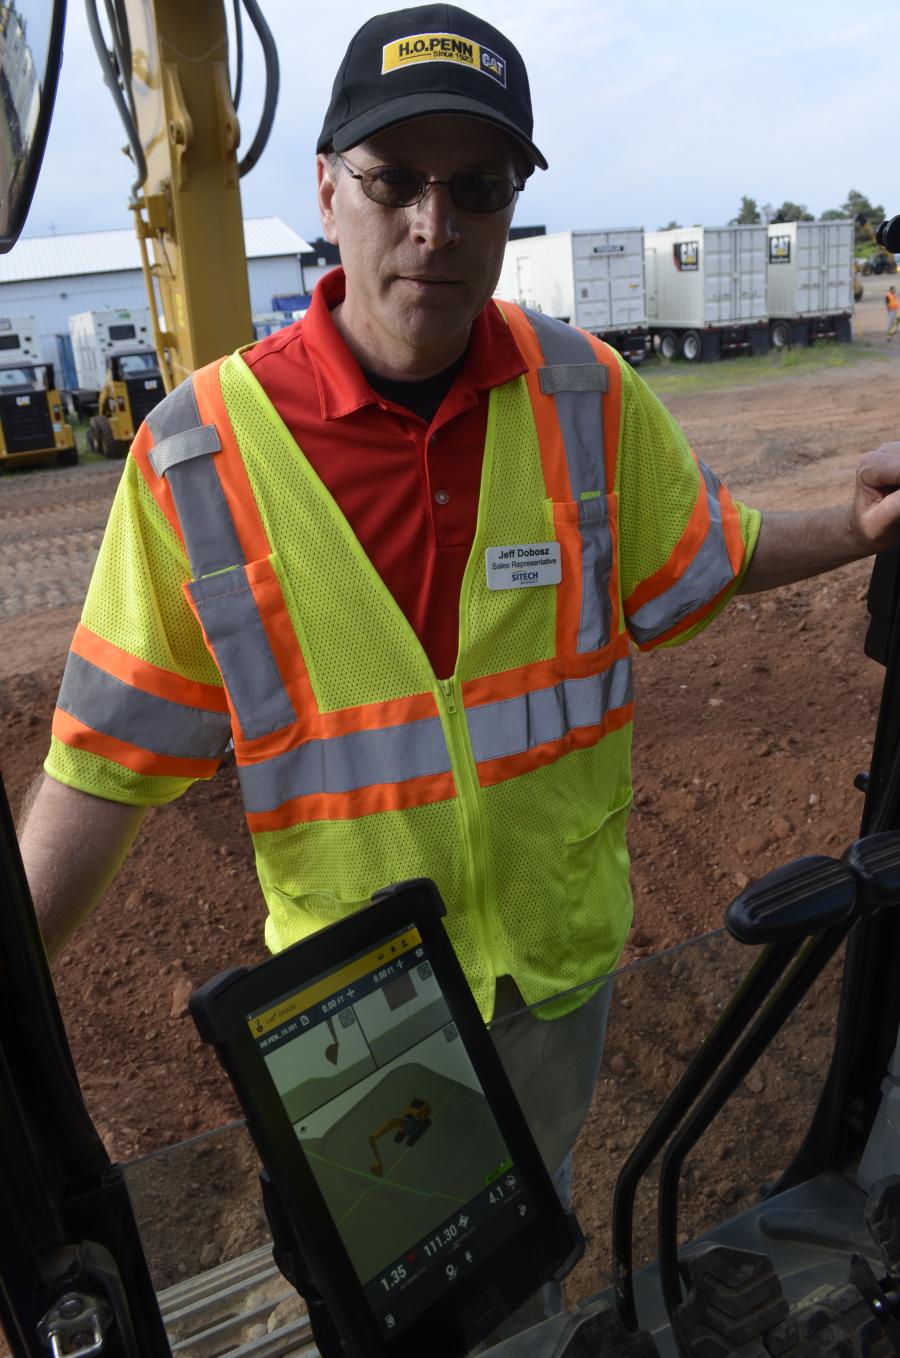 Jeff Dobosz of SITECH Metro Northeast explains Trimble Earthworks, now available in Caterpillar excavators. The Earthworks display provides operators with an extraordinarily detailed view of exactly where they are digging and how it relates to each project’s design.